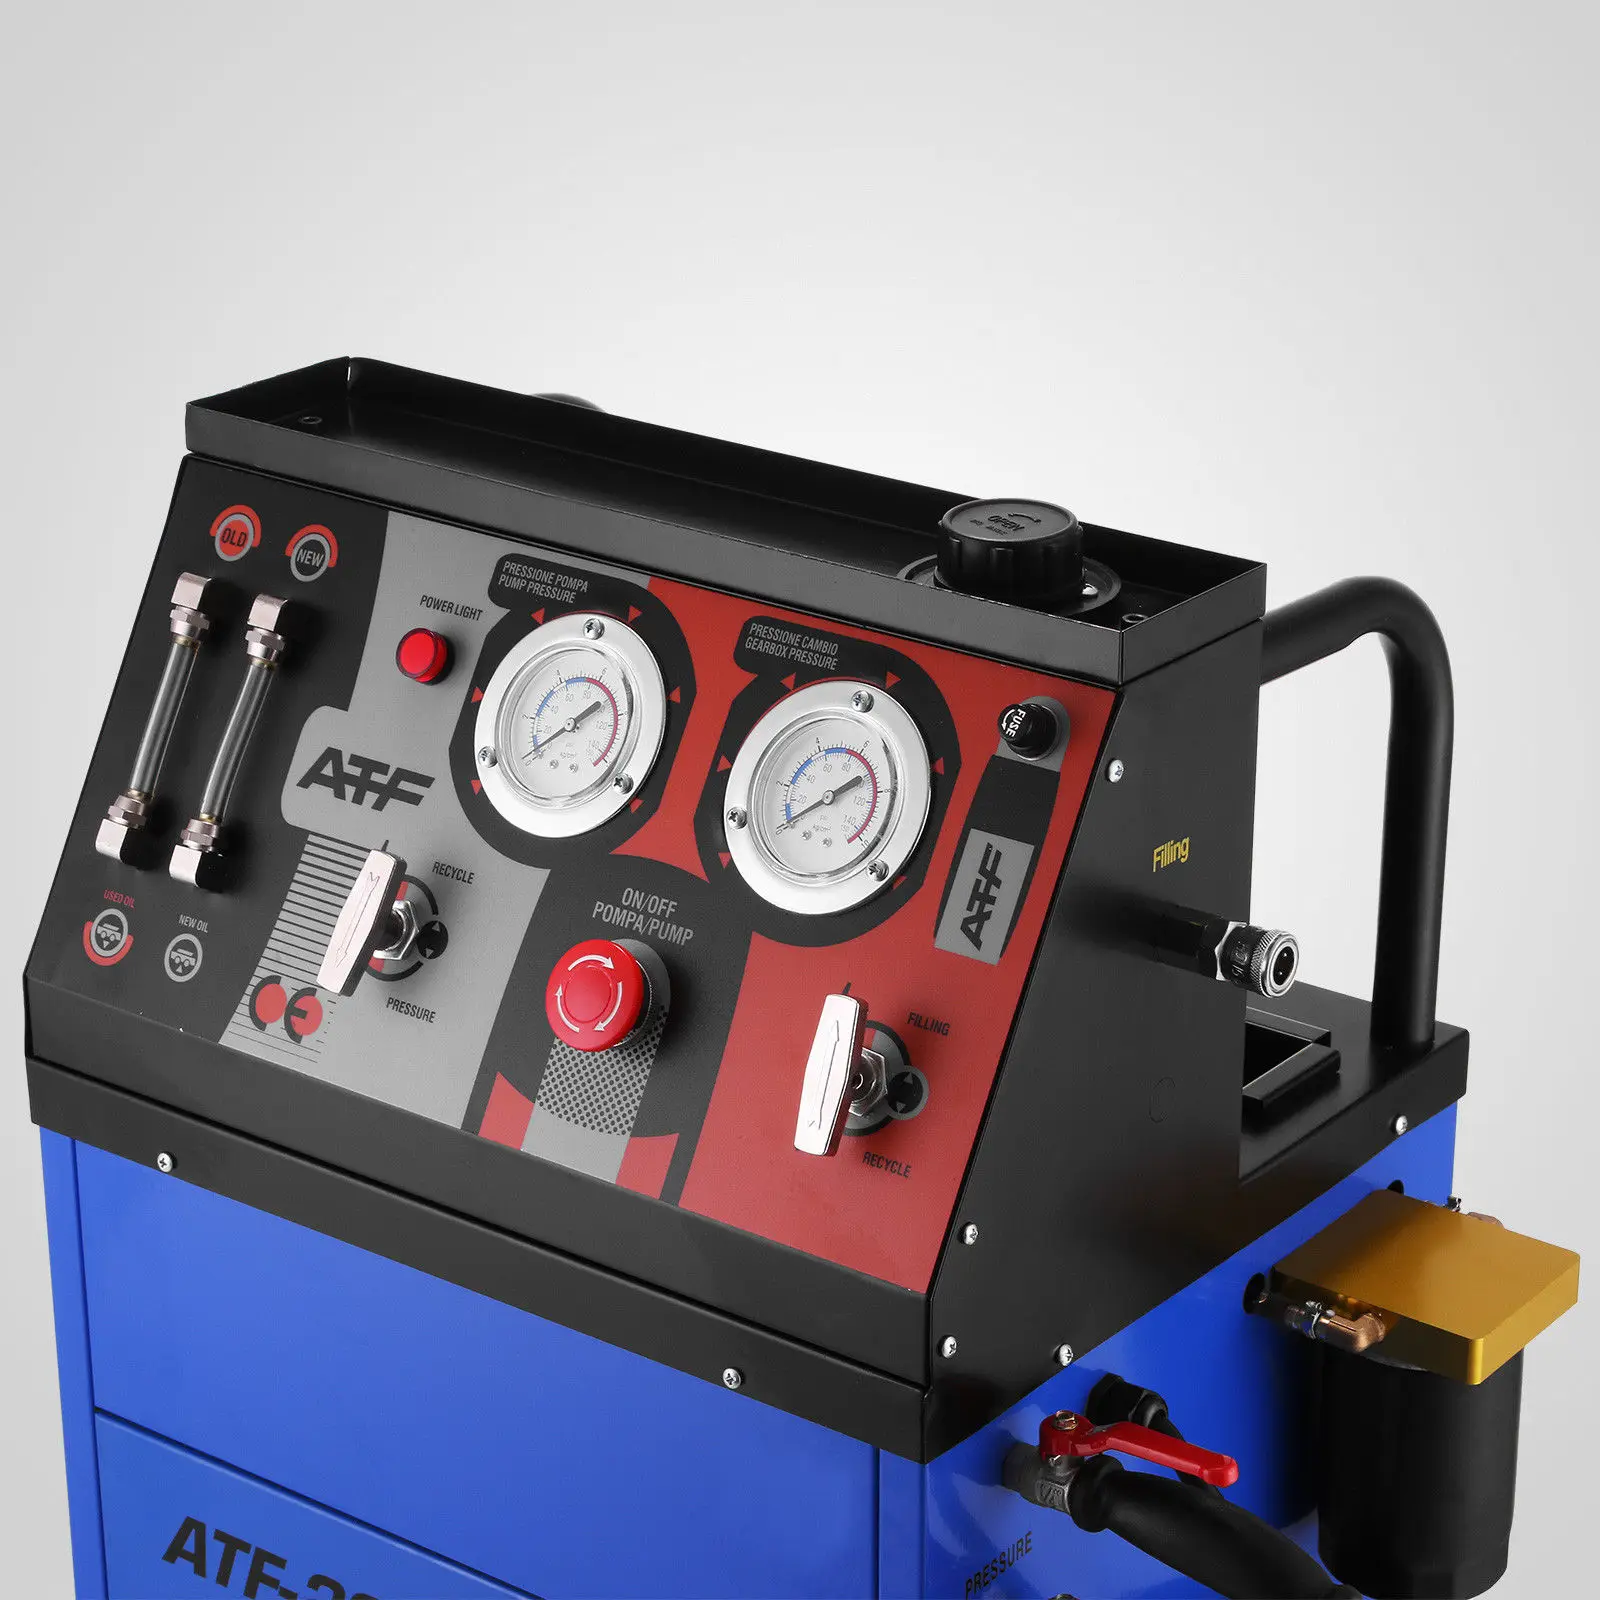 

ATF-20 Auto Automatic 12V Transmission Fluid Oil Exchange Flush Cleaning Machine